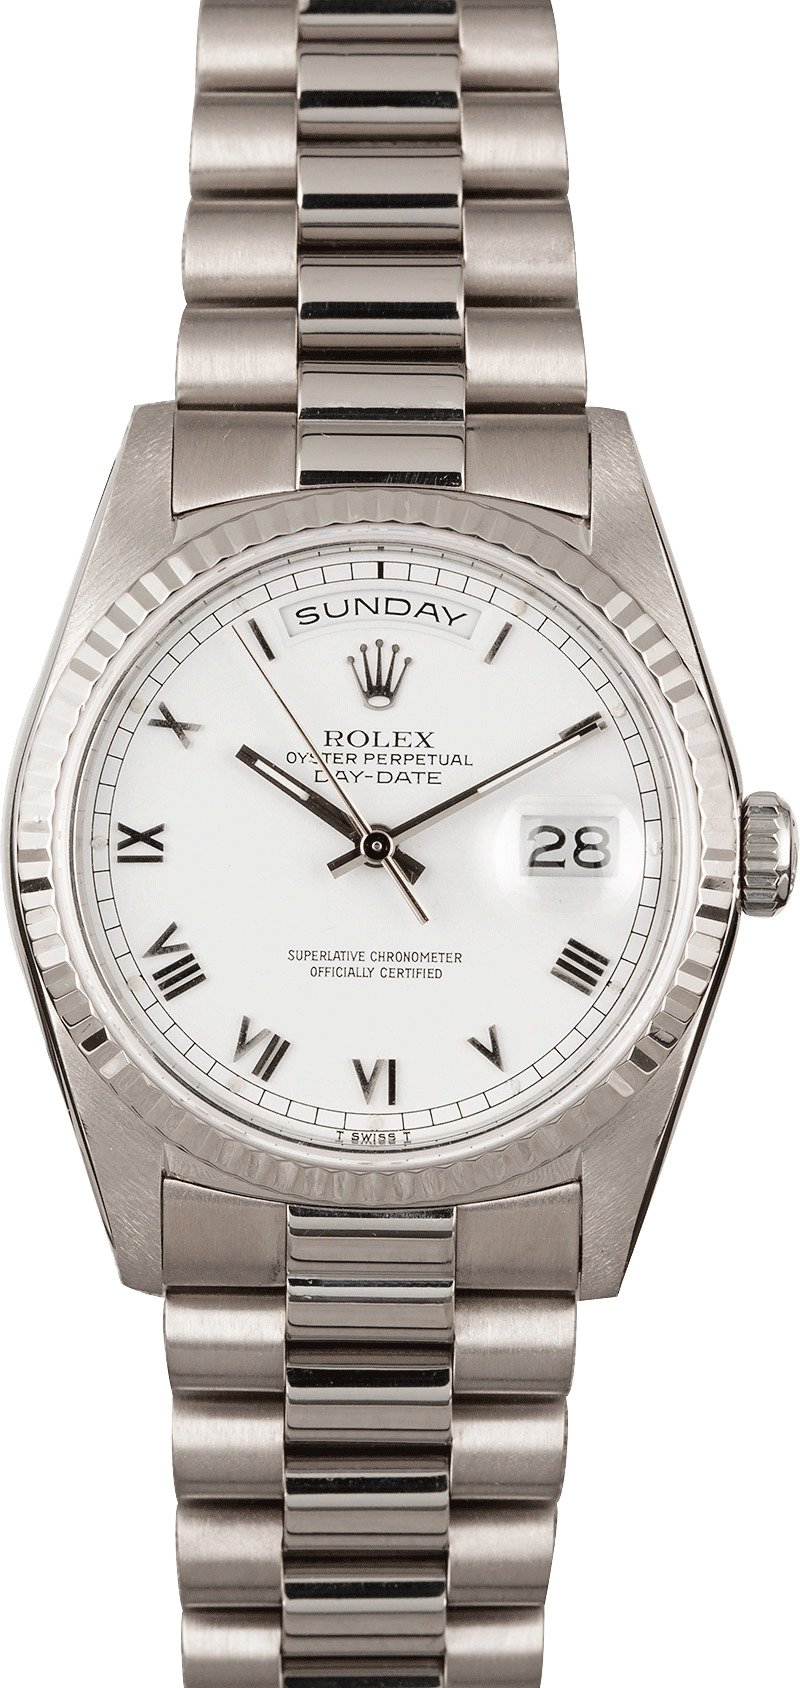 PreOwned Rolex Day-Date 18239 White 